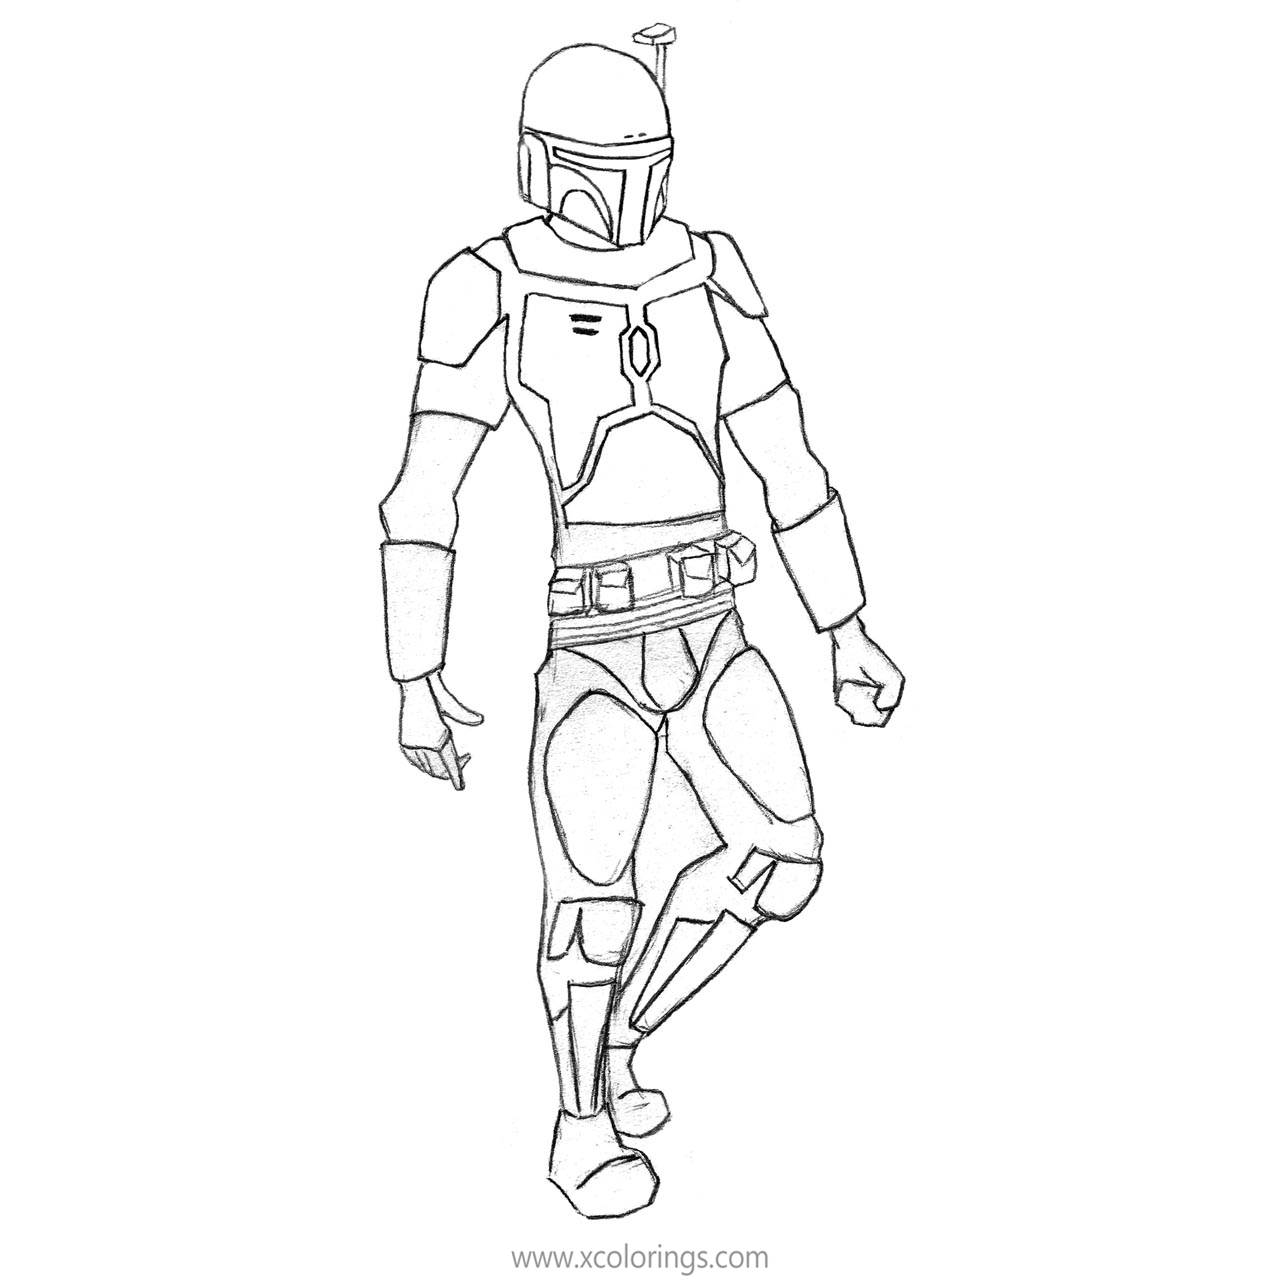 Free The Mandalorian Coloring Pages printable